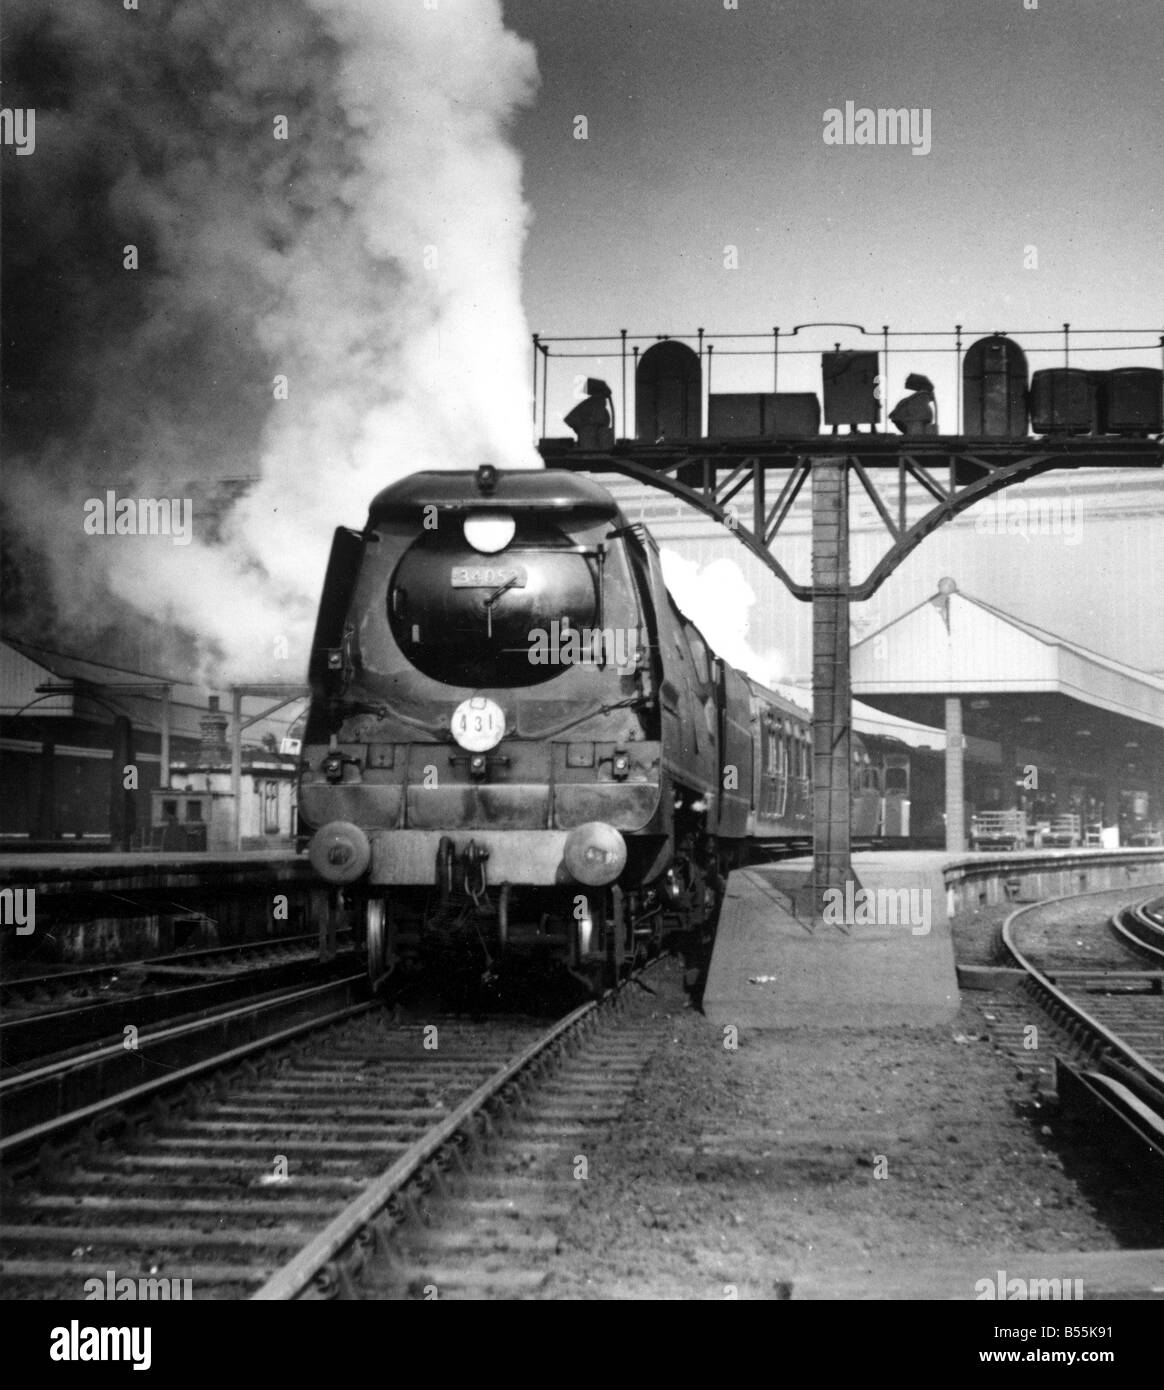 No 34052, Lord Dowding class locomotive, Battle of Britain. c.1950 ...